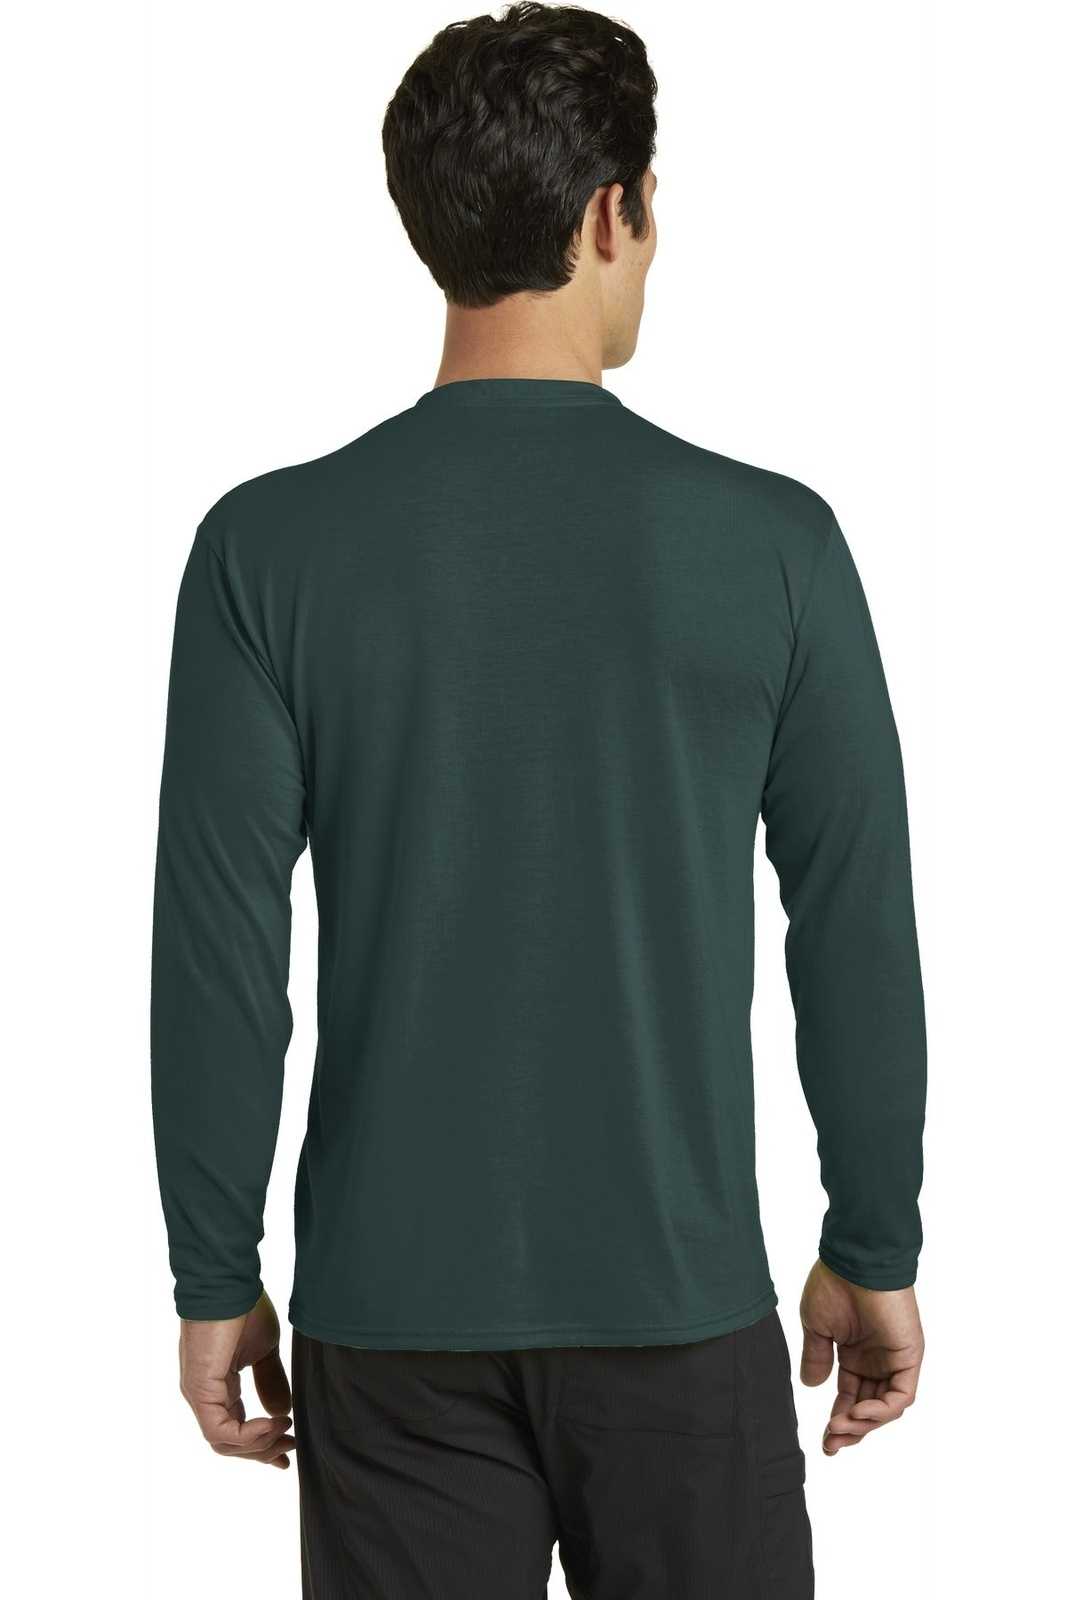 Port &amp; Company PC381LS Long Sleeve Performance Blend Tee - Dark Green - HIT a Double - 2